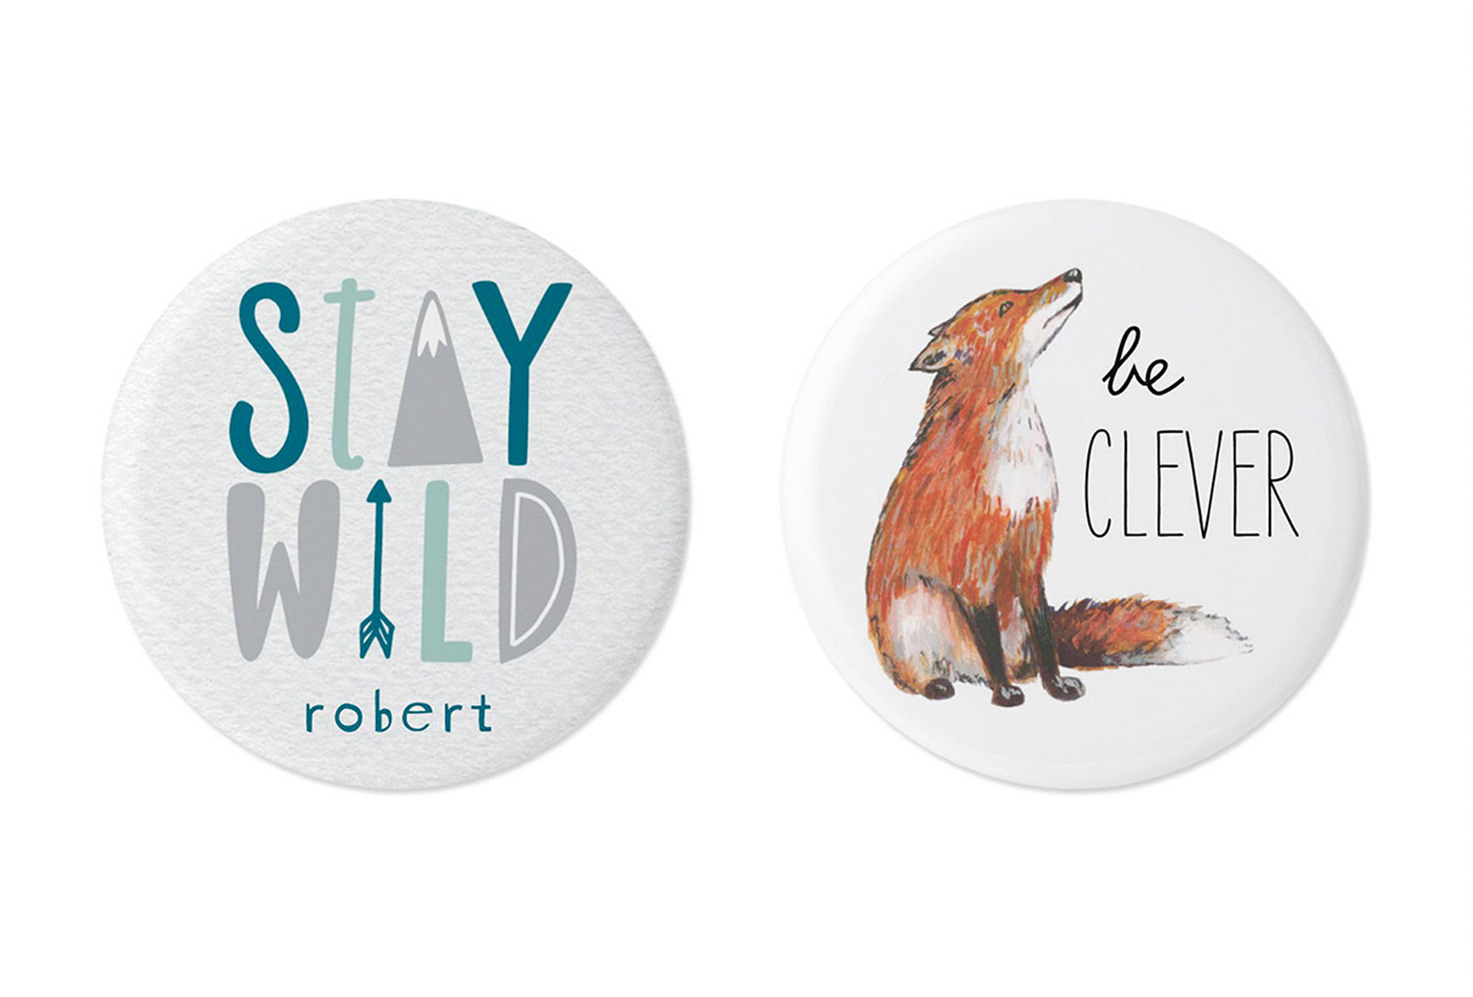 White, blue and gray pins with name, stay wild and fox.